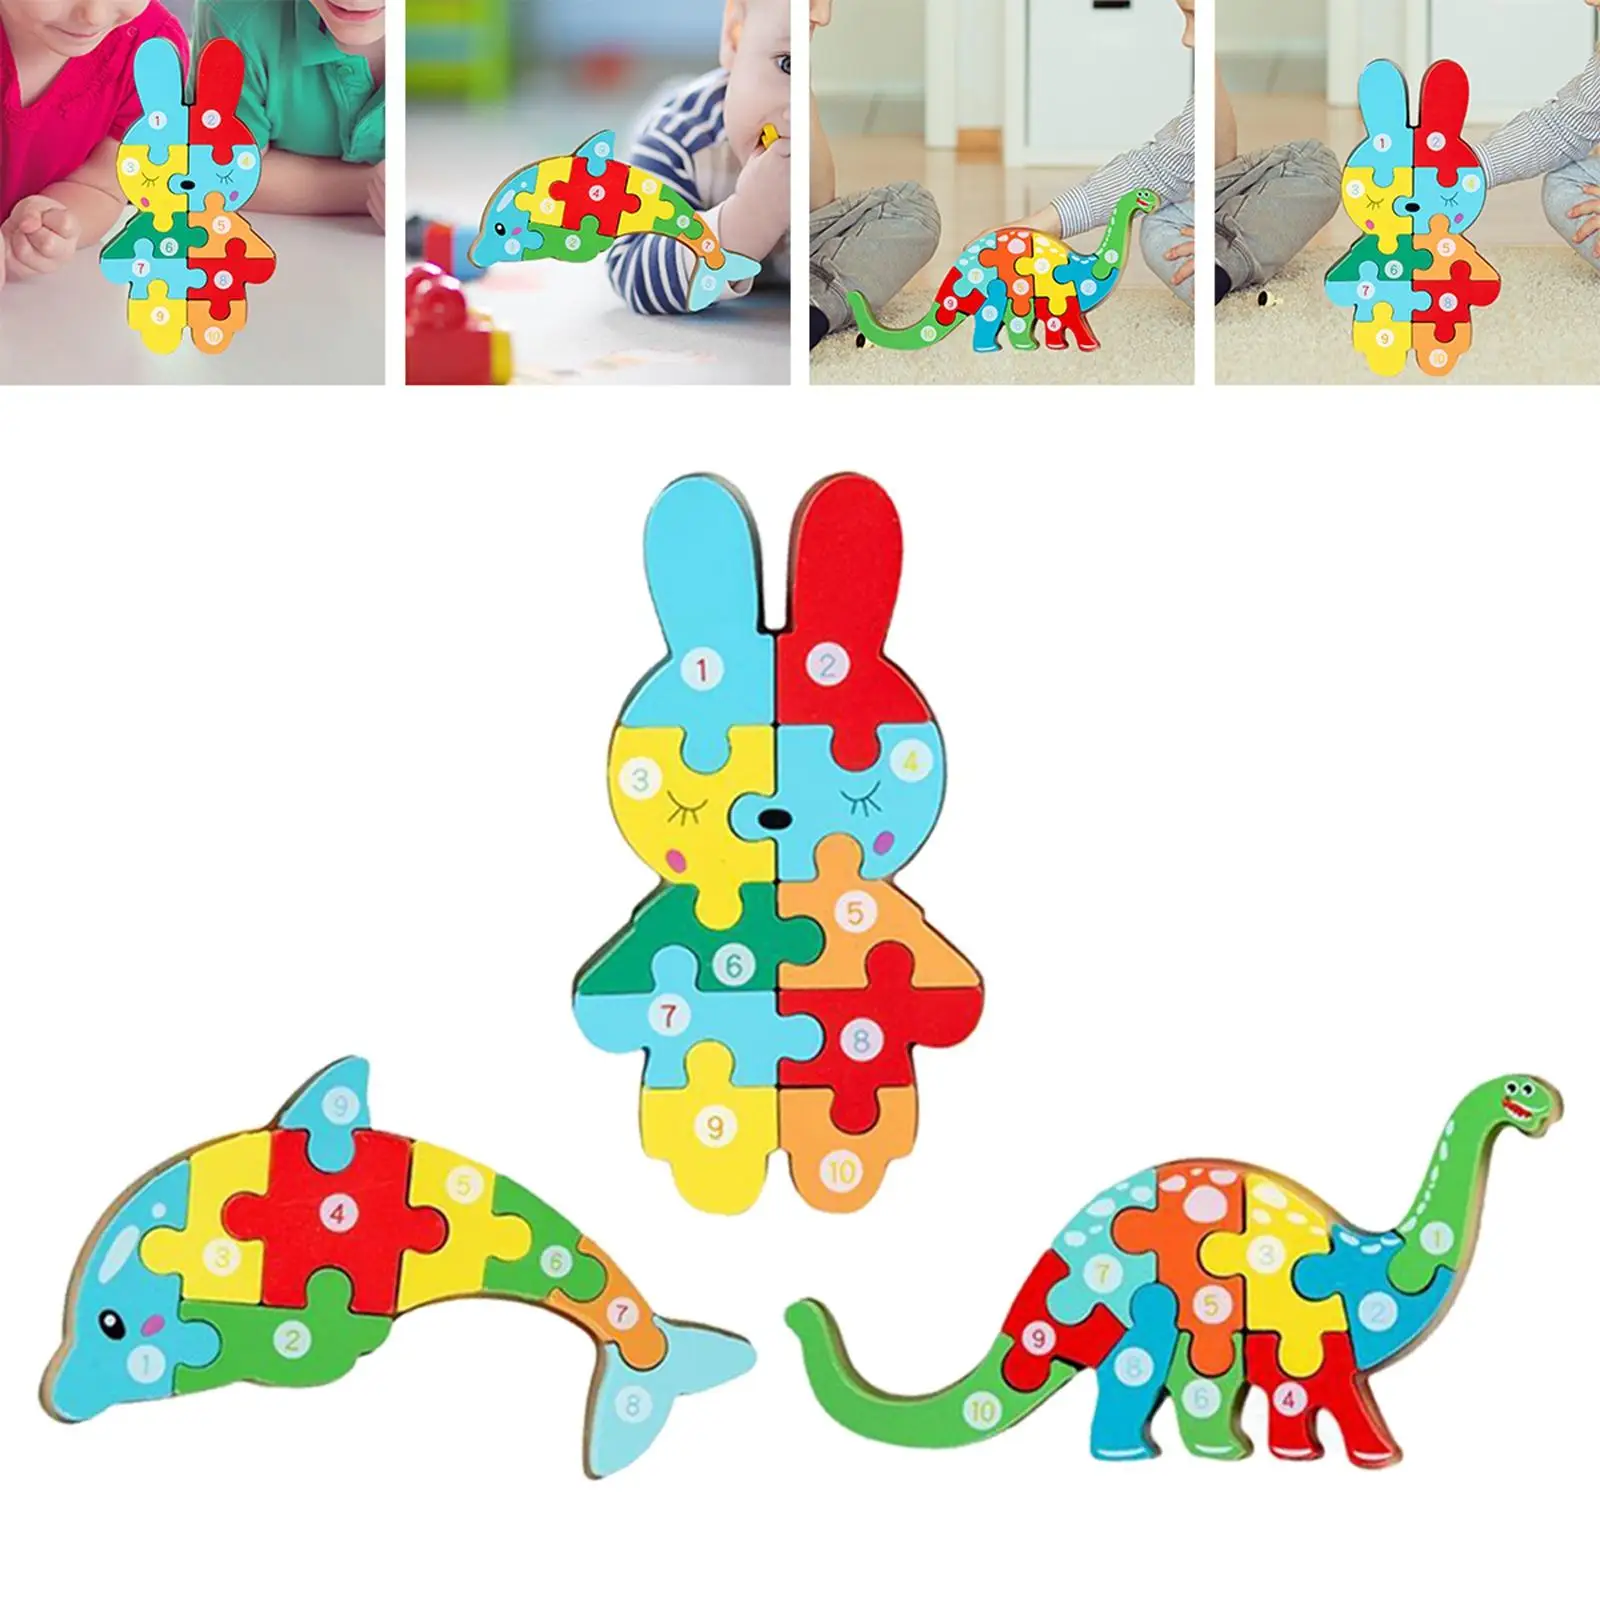 3Pcs Animal Jigsaw Puzzles Kid Wooden Toy for Preschool Boys or Girls